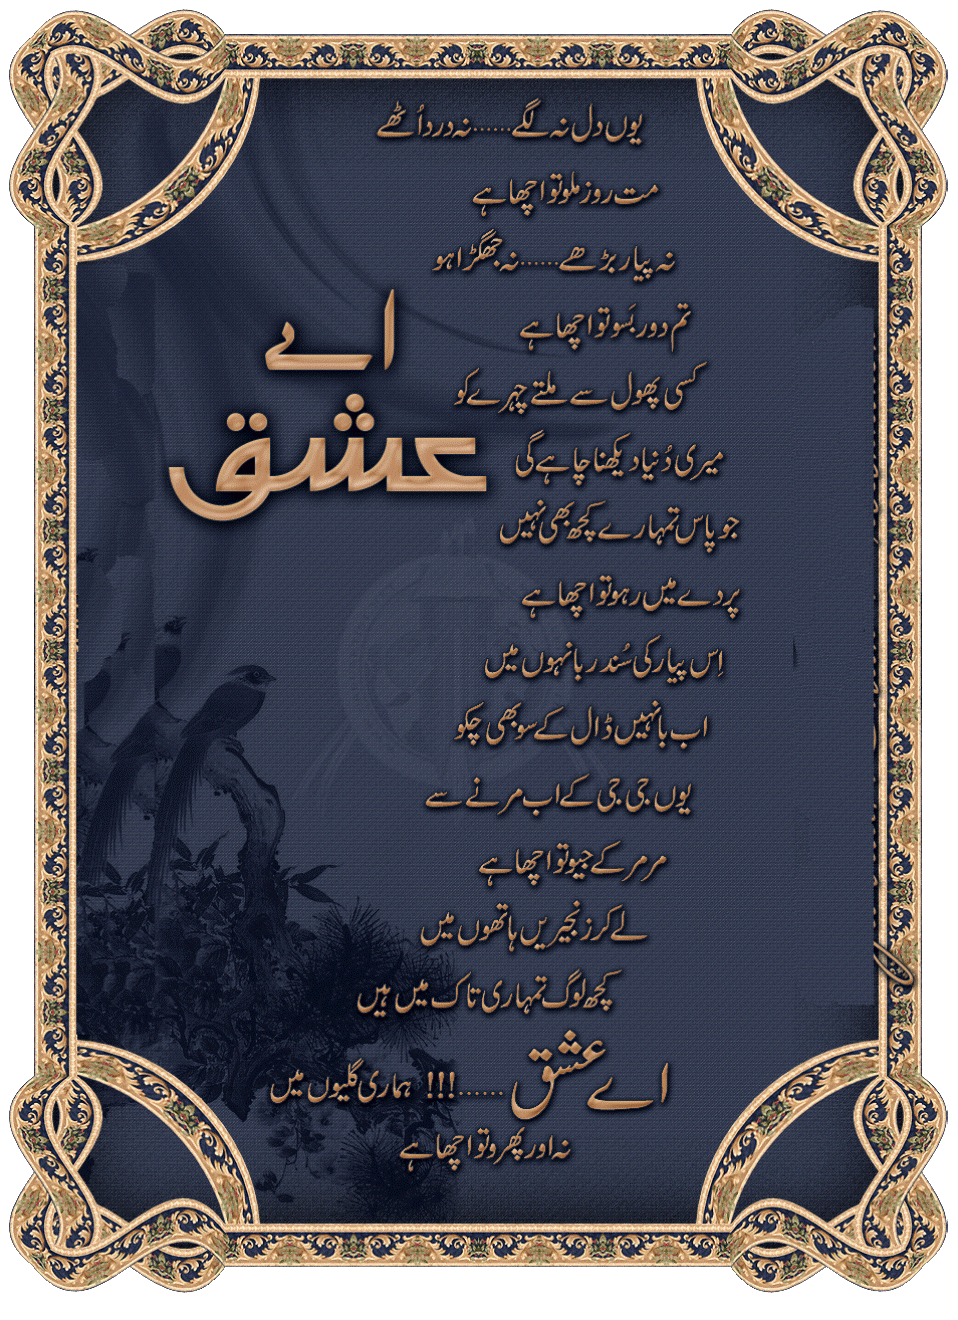 The Best of Ahmed Faraz Latest Collection of Urdu Poetry